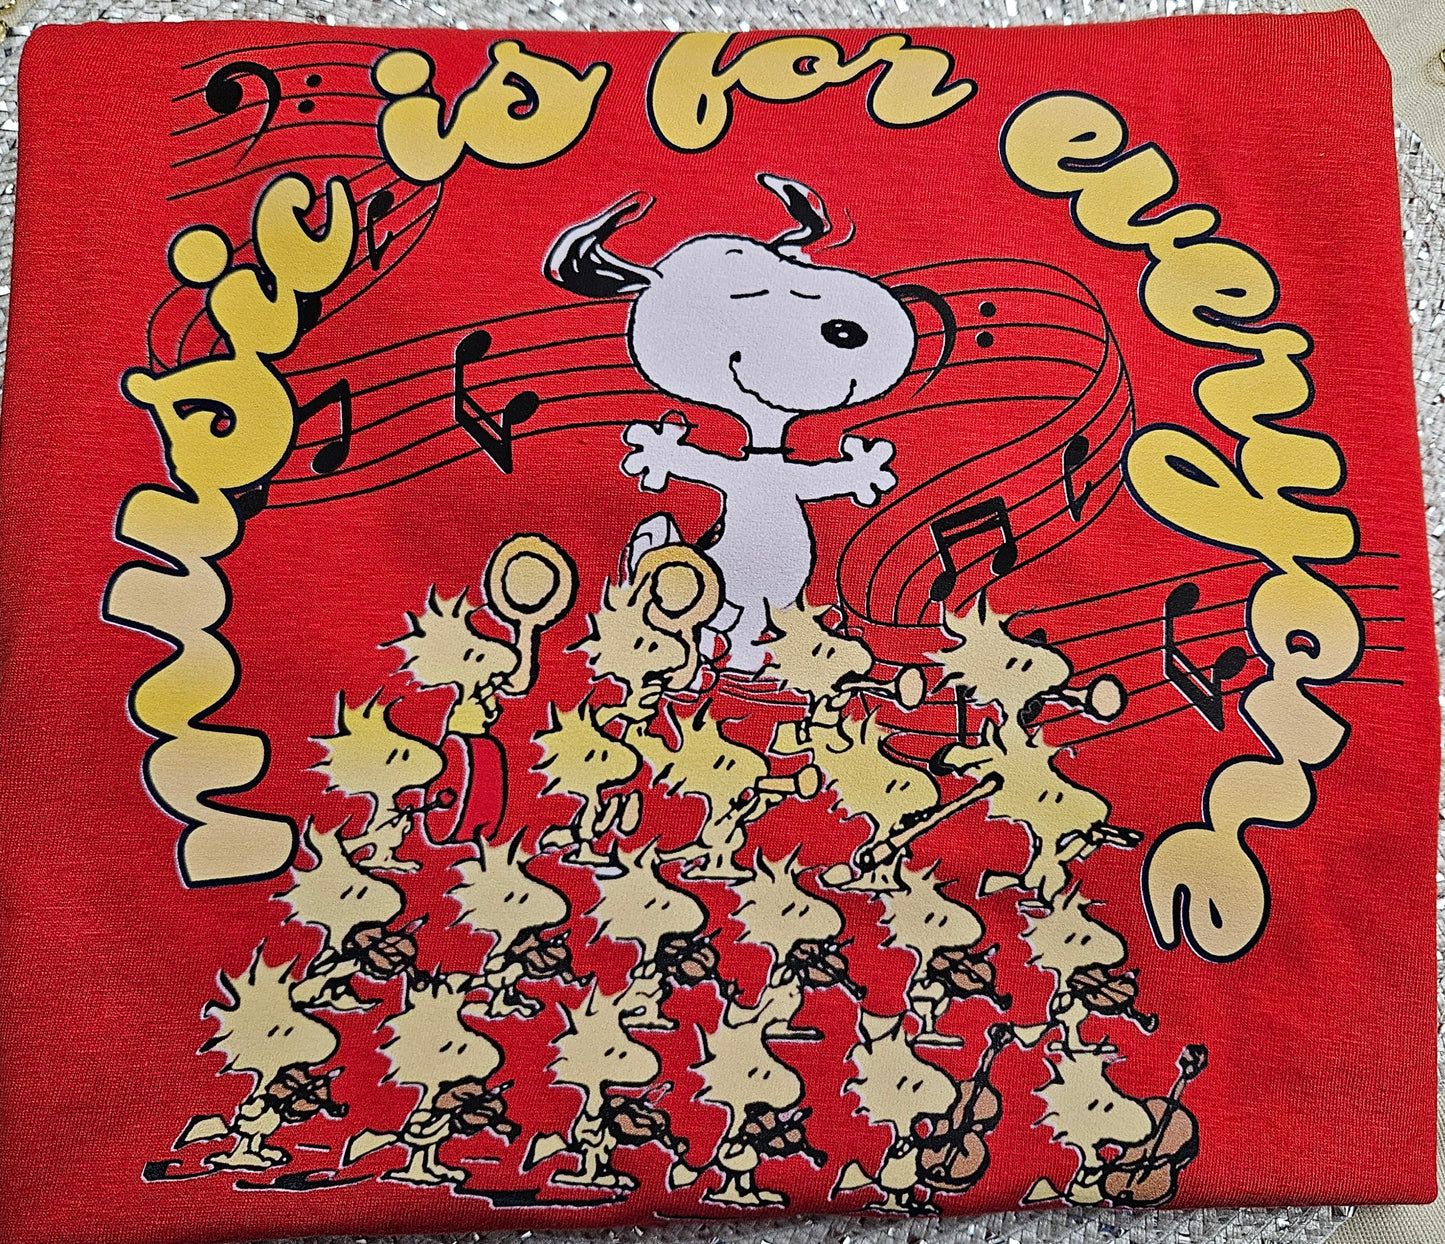 Music Is for Everyone- Snoopy